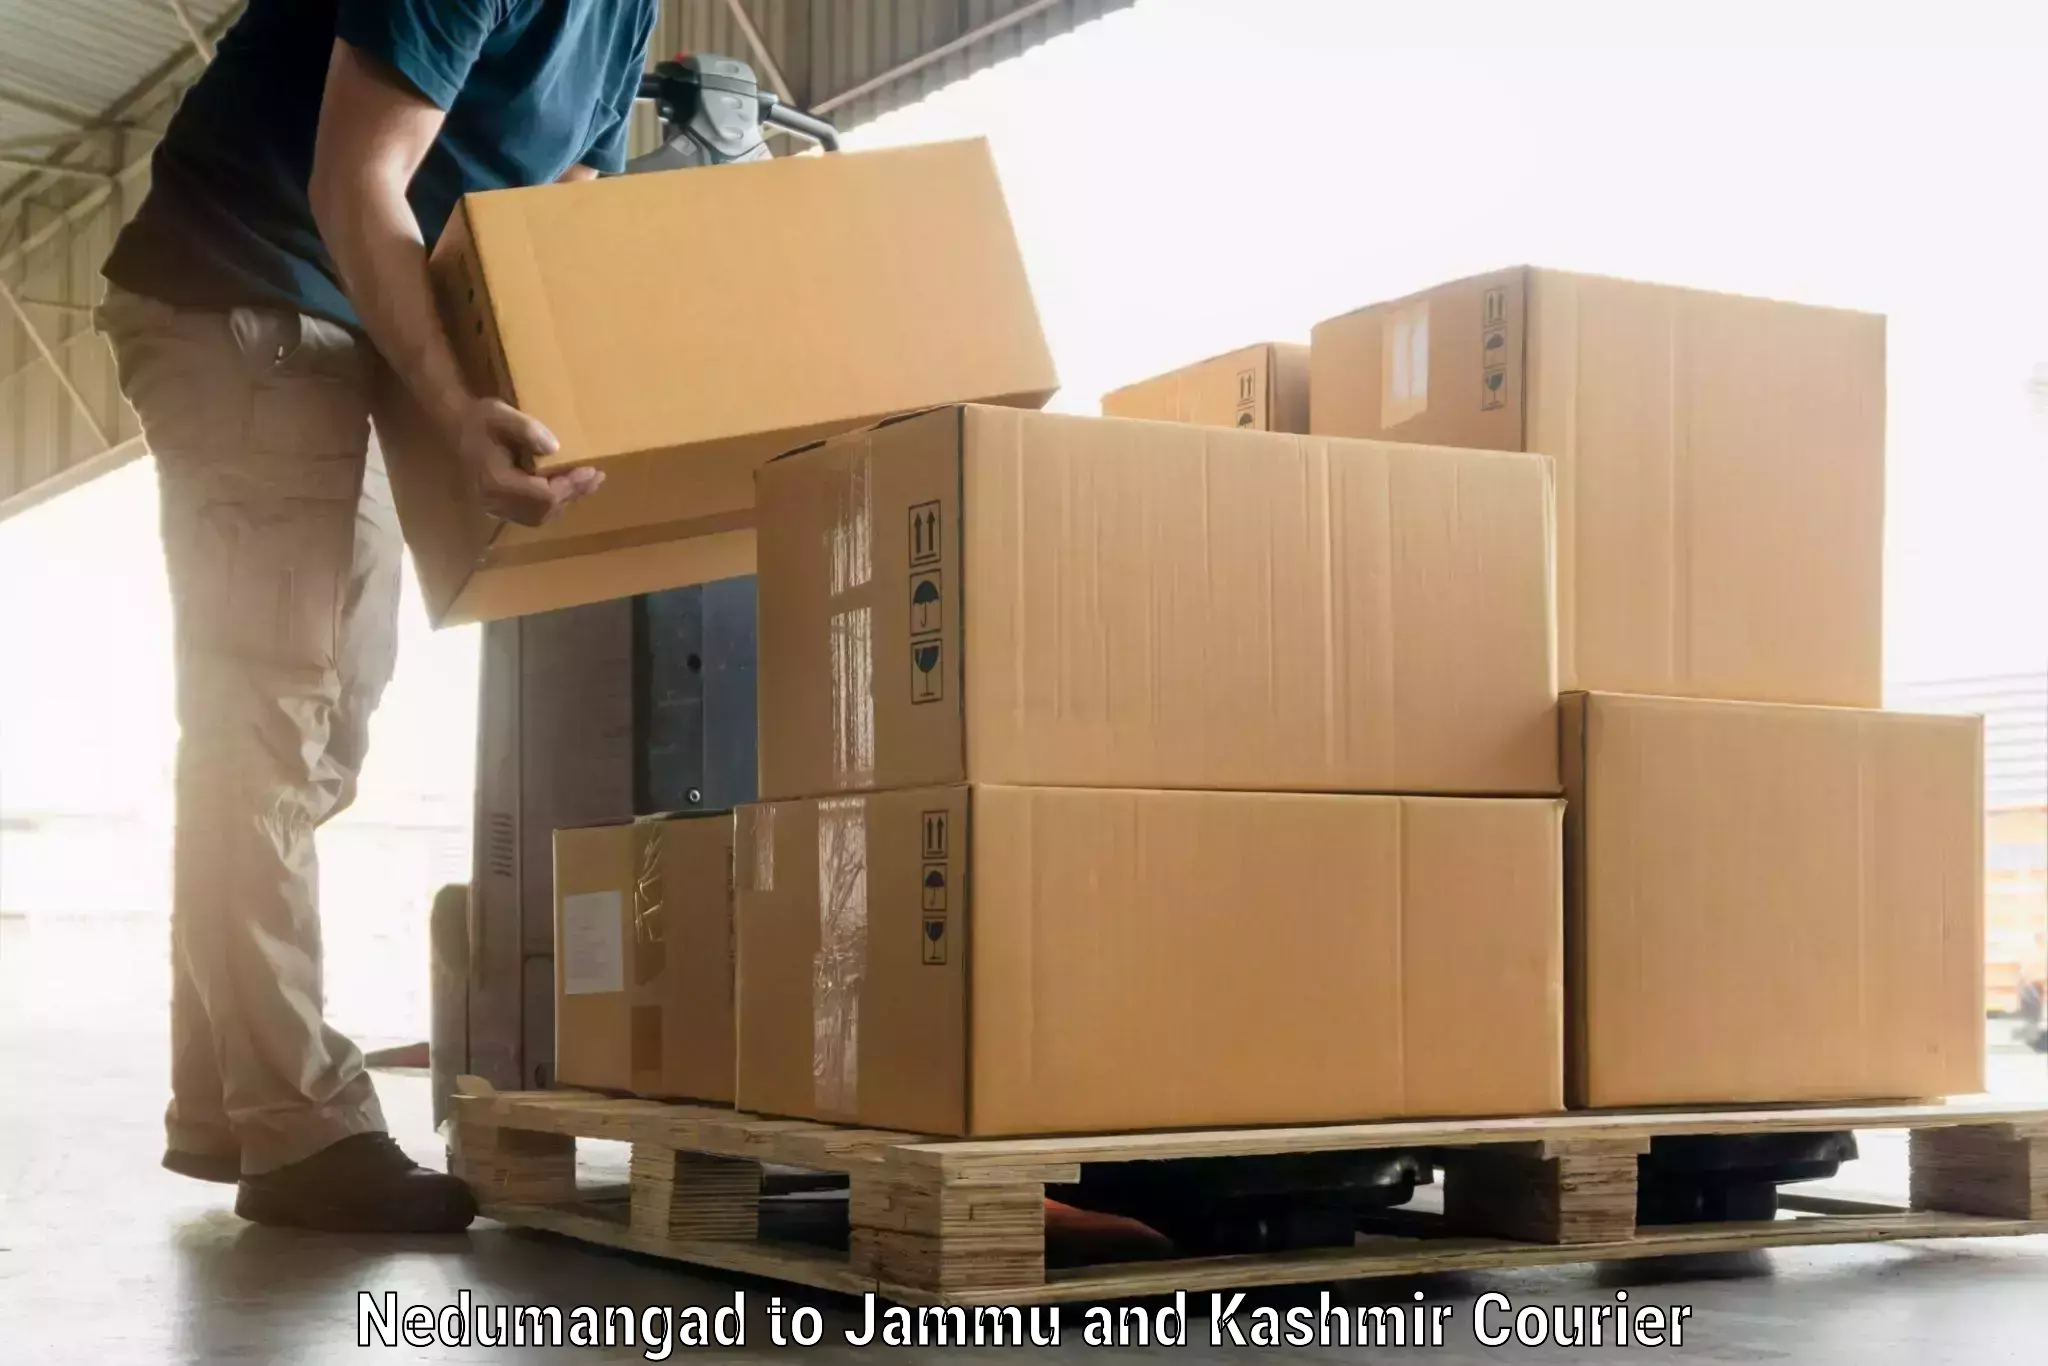 Luggage shipment specialists Nedumangad to Poonch